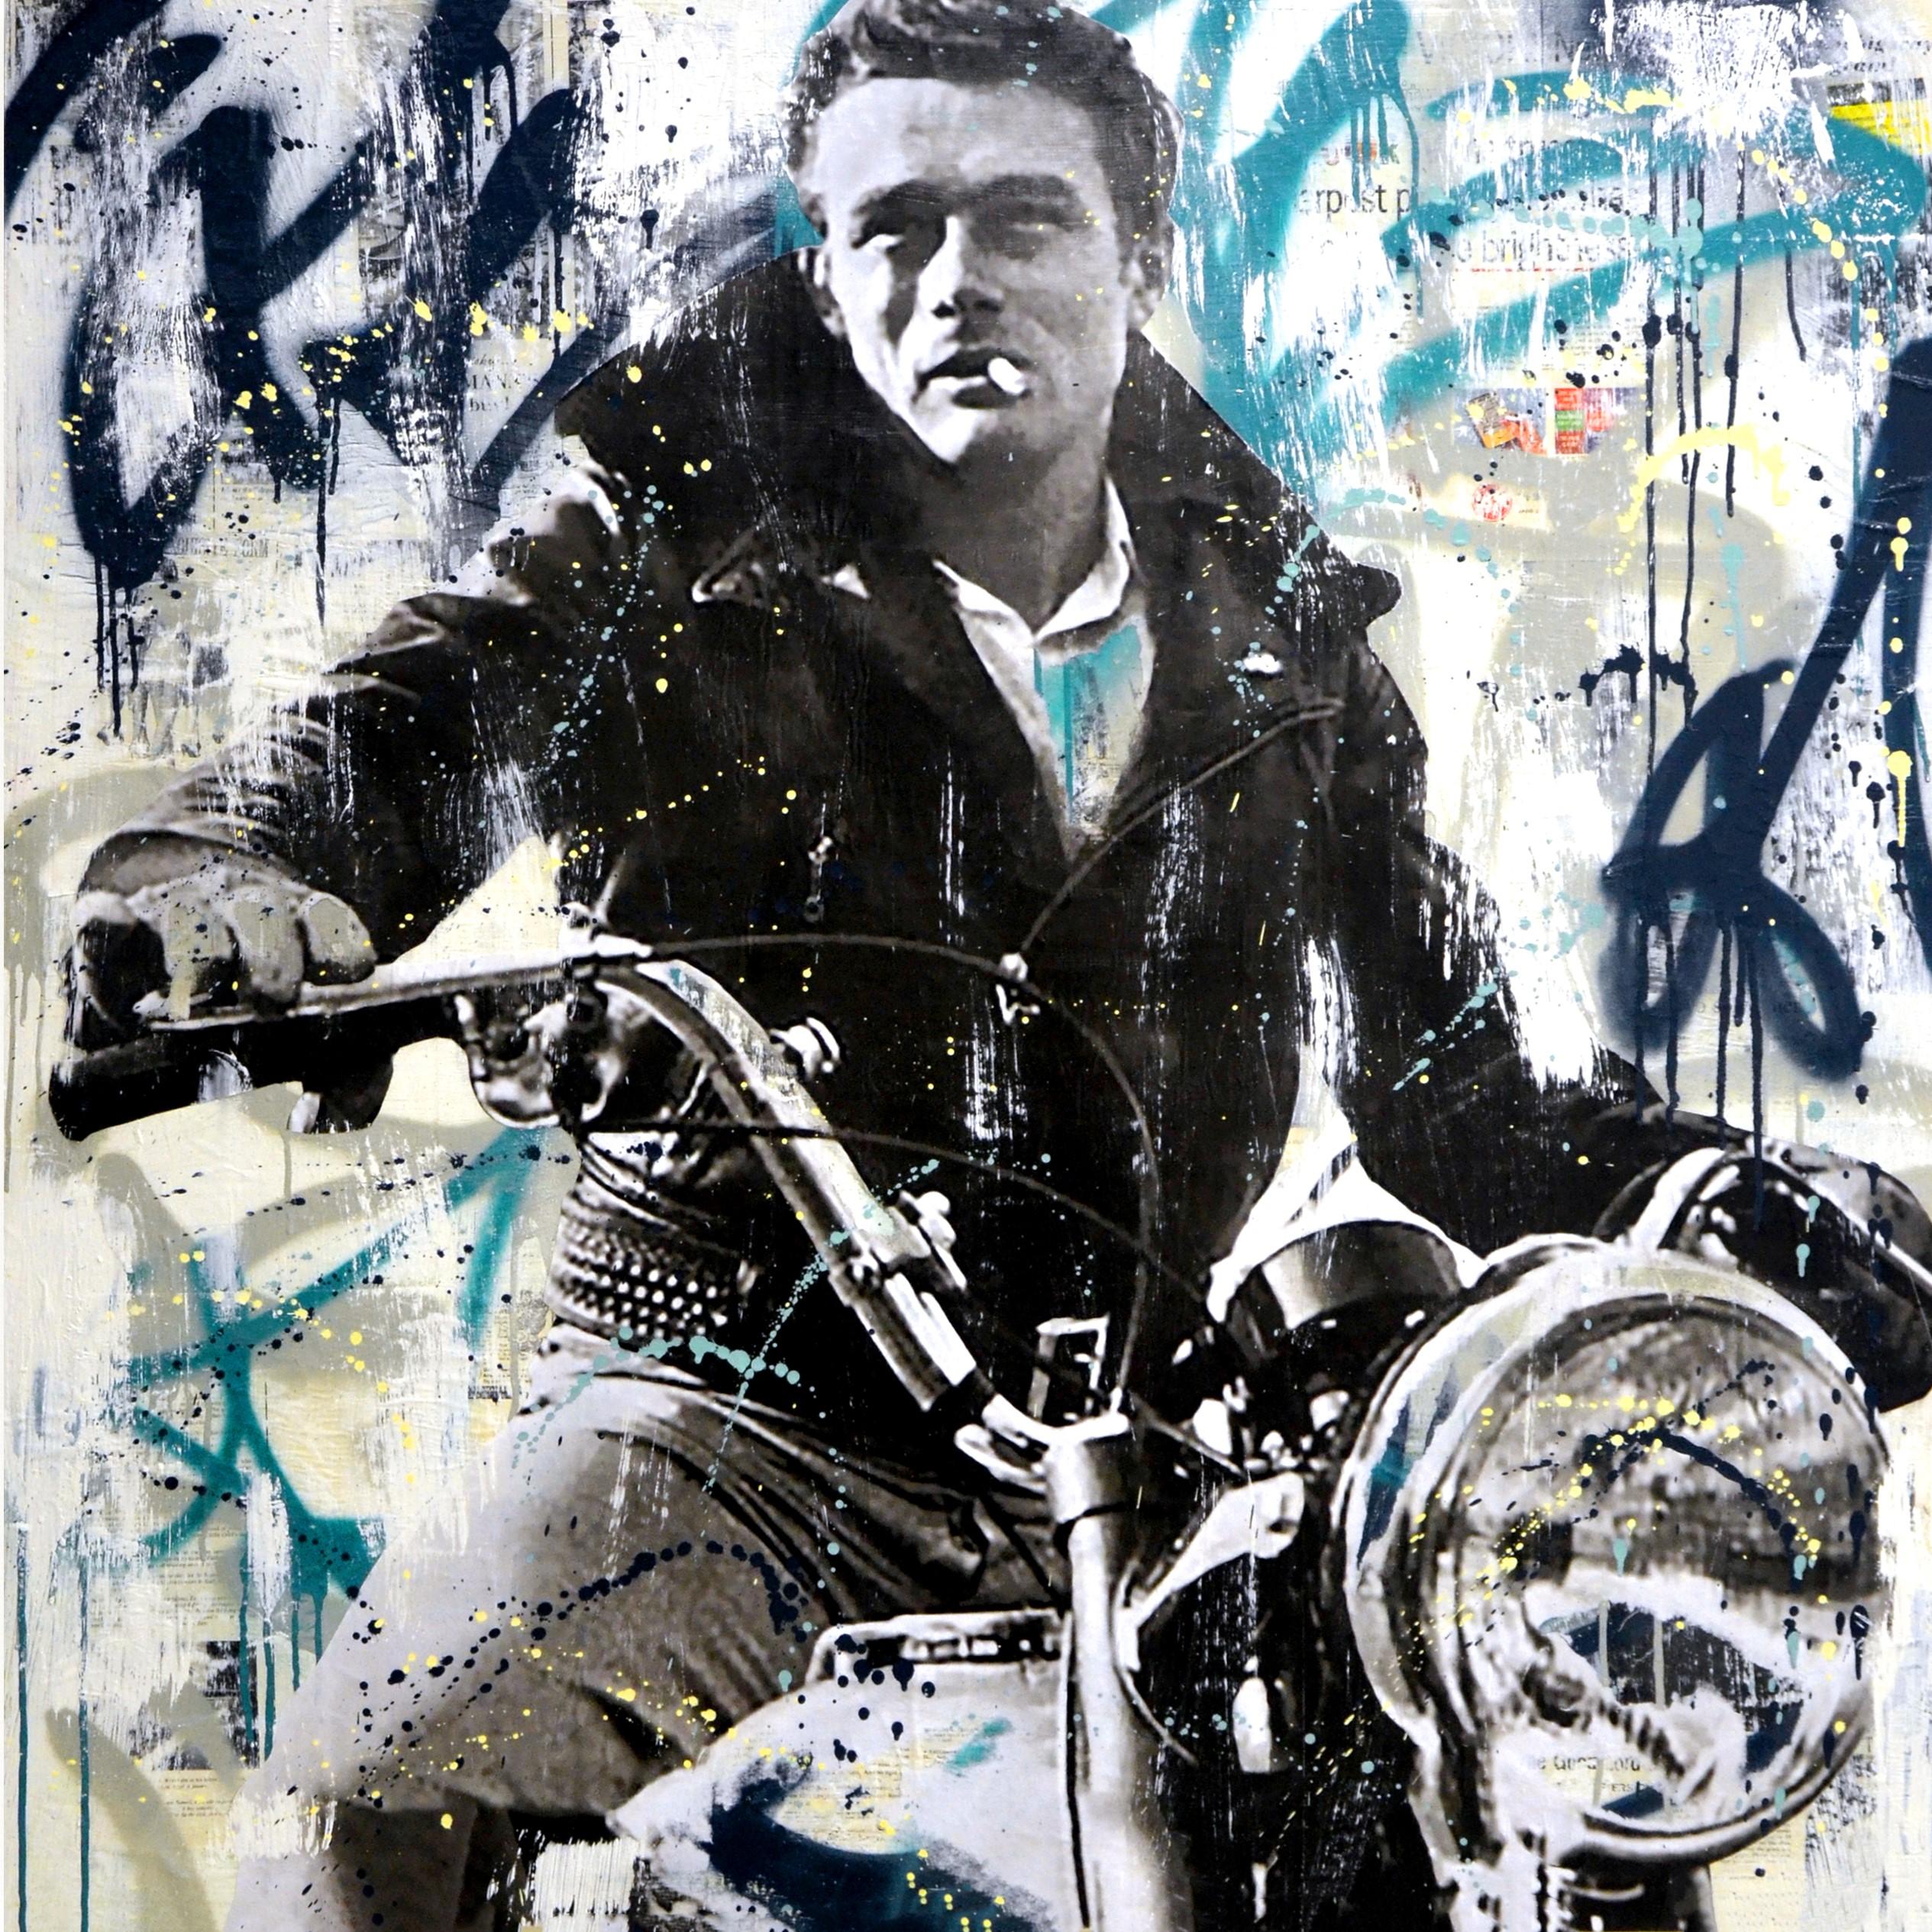 James Dean - Commission - on wood panel - Mixed Media Art by Seek One